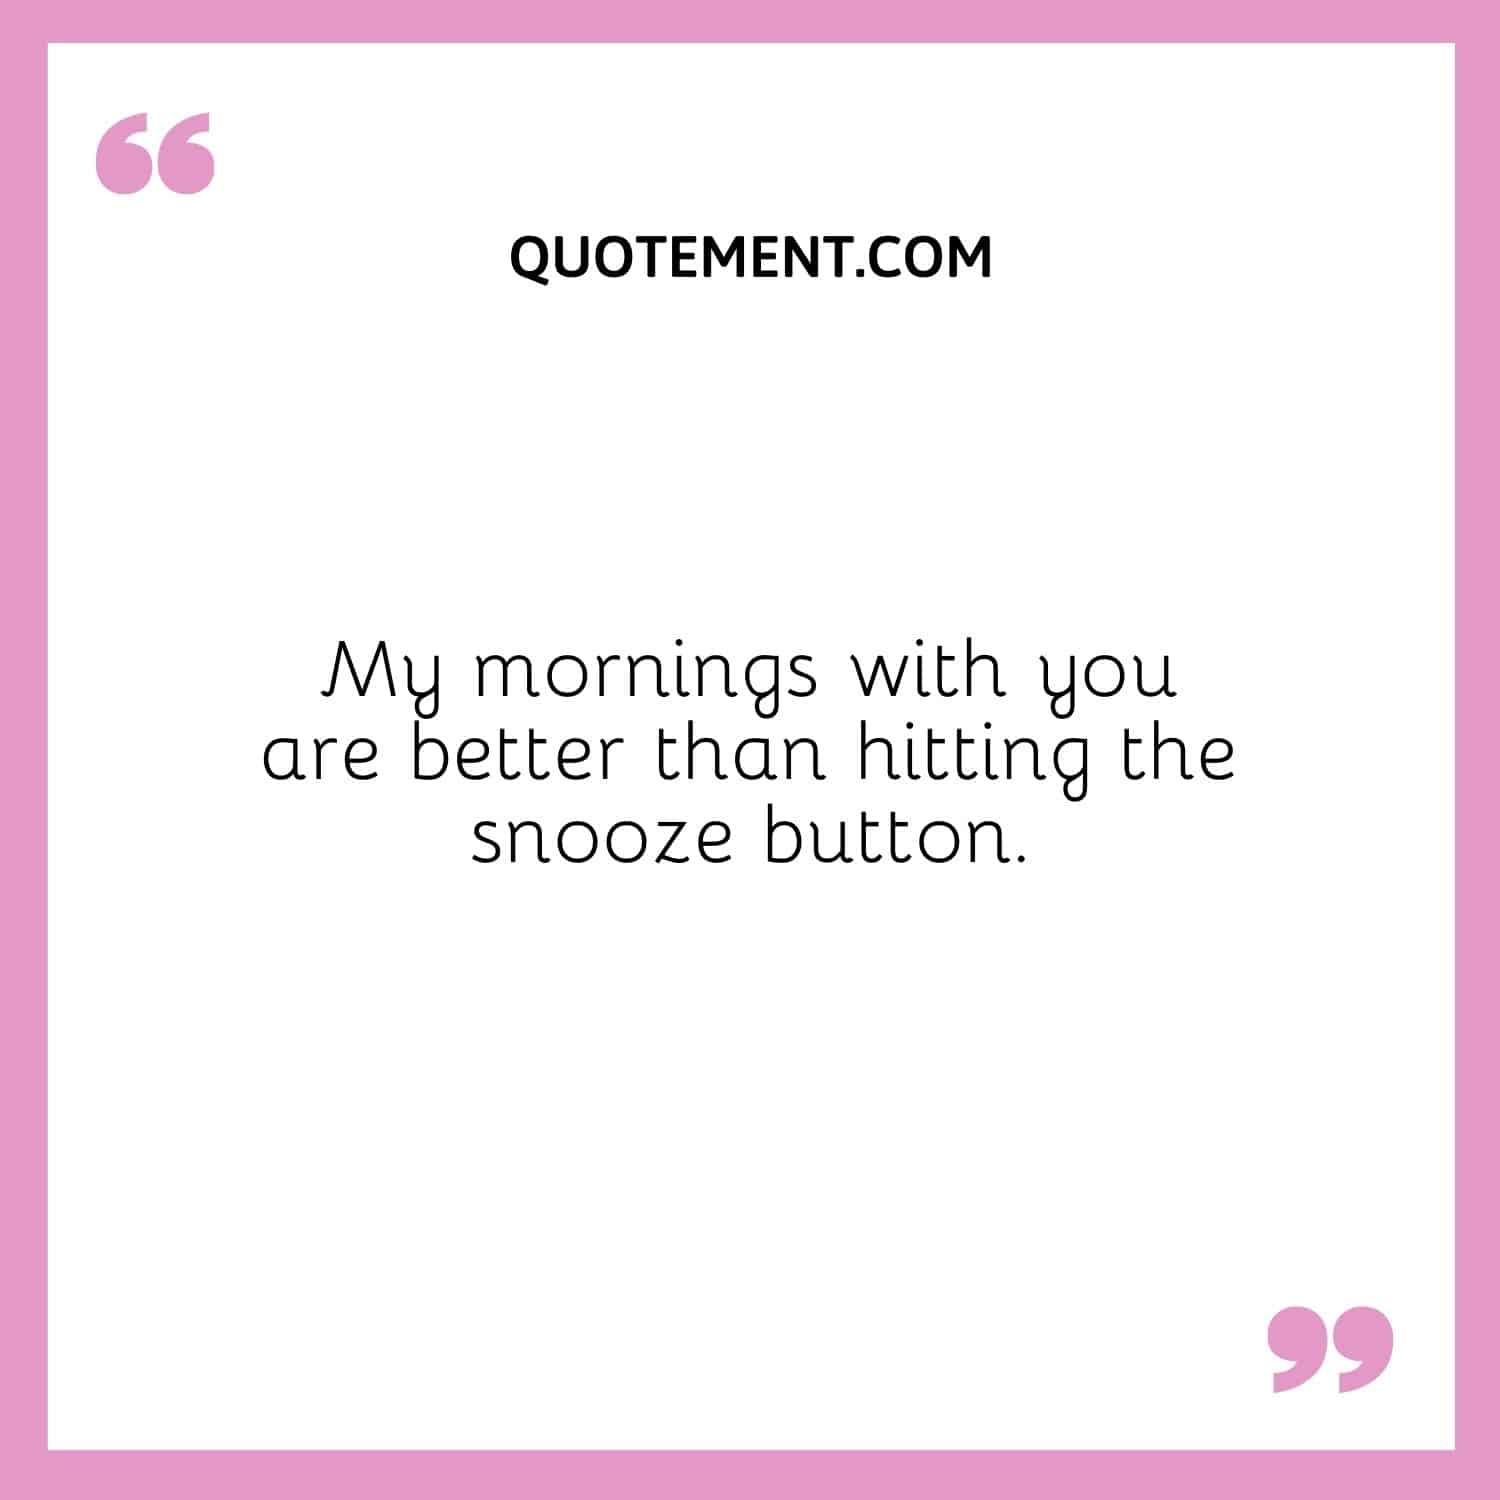 My mornings with you are better than hitting the snooze button